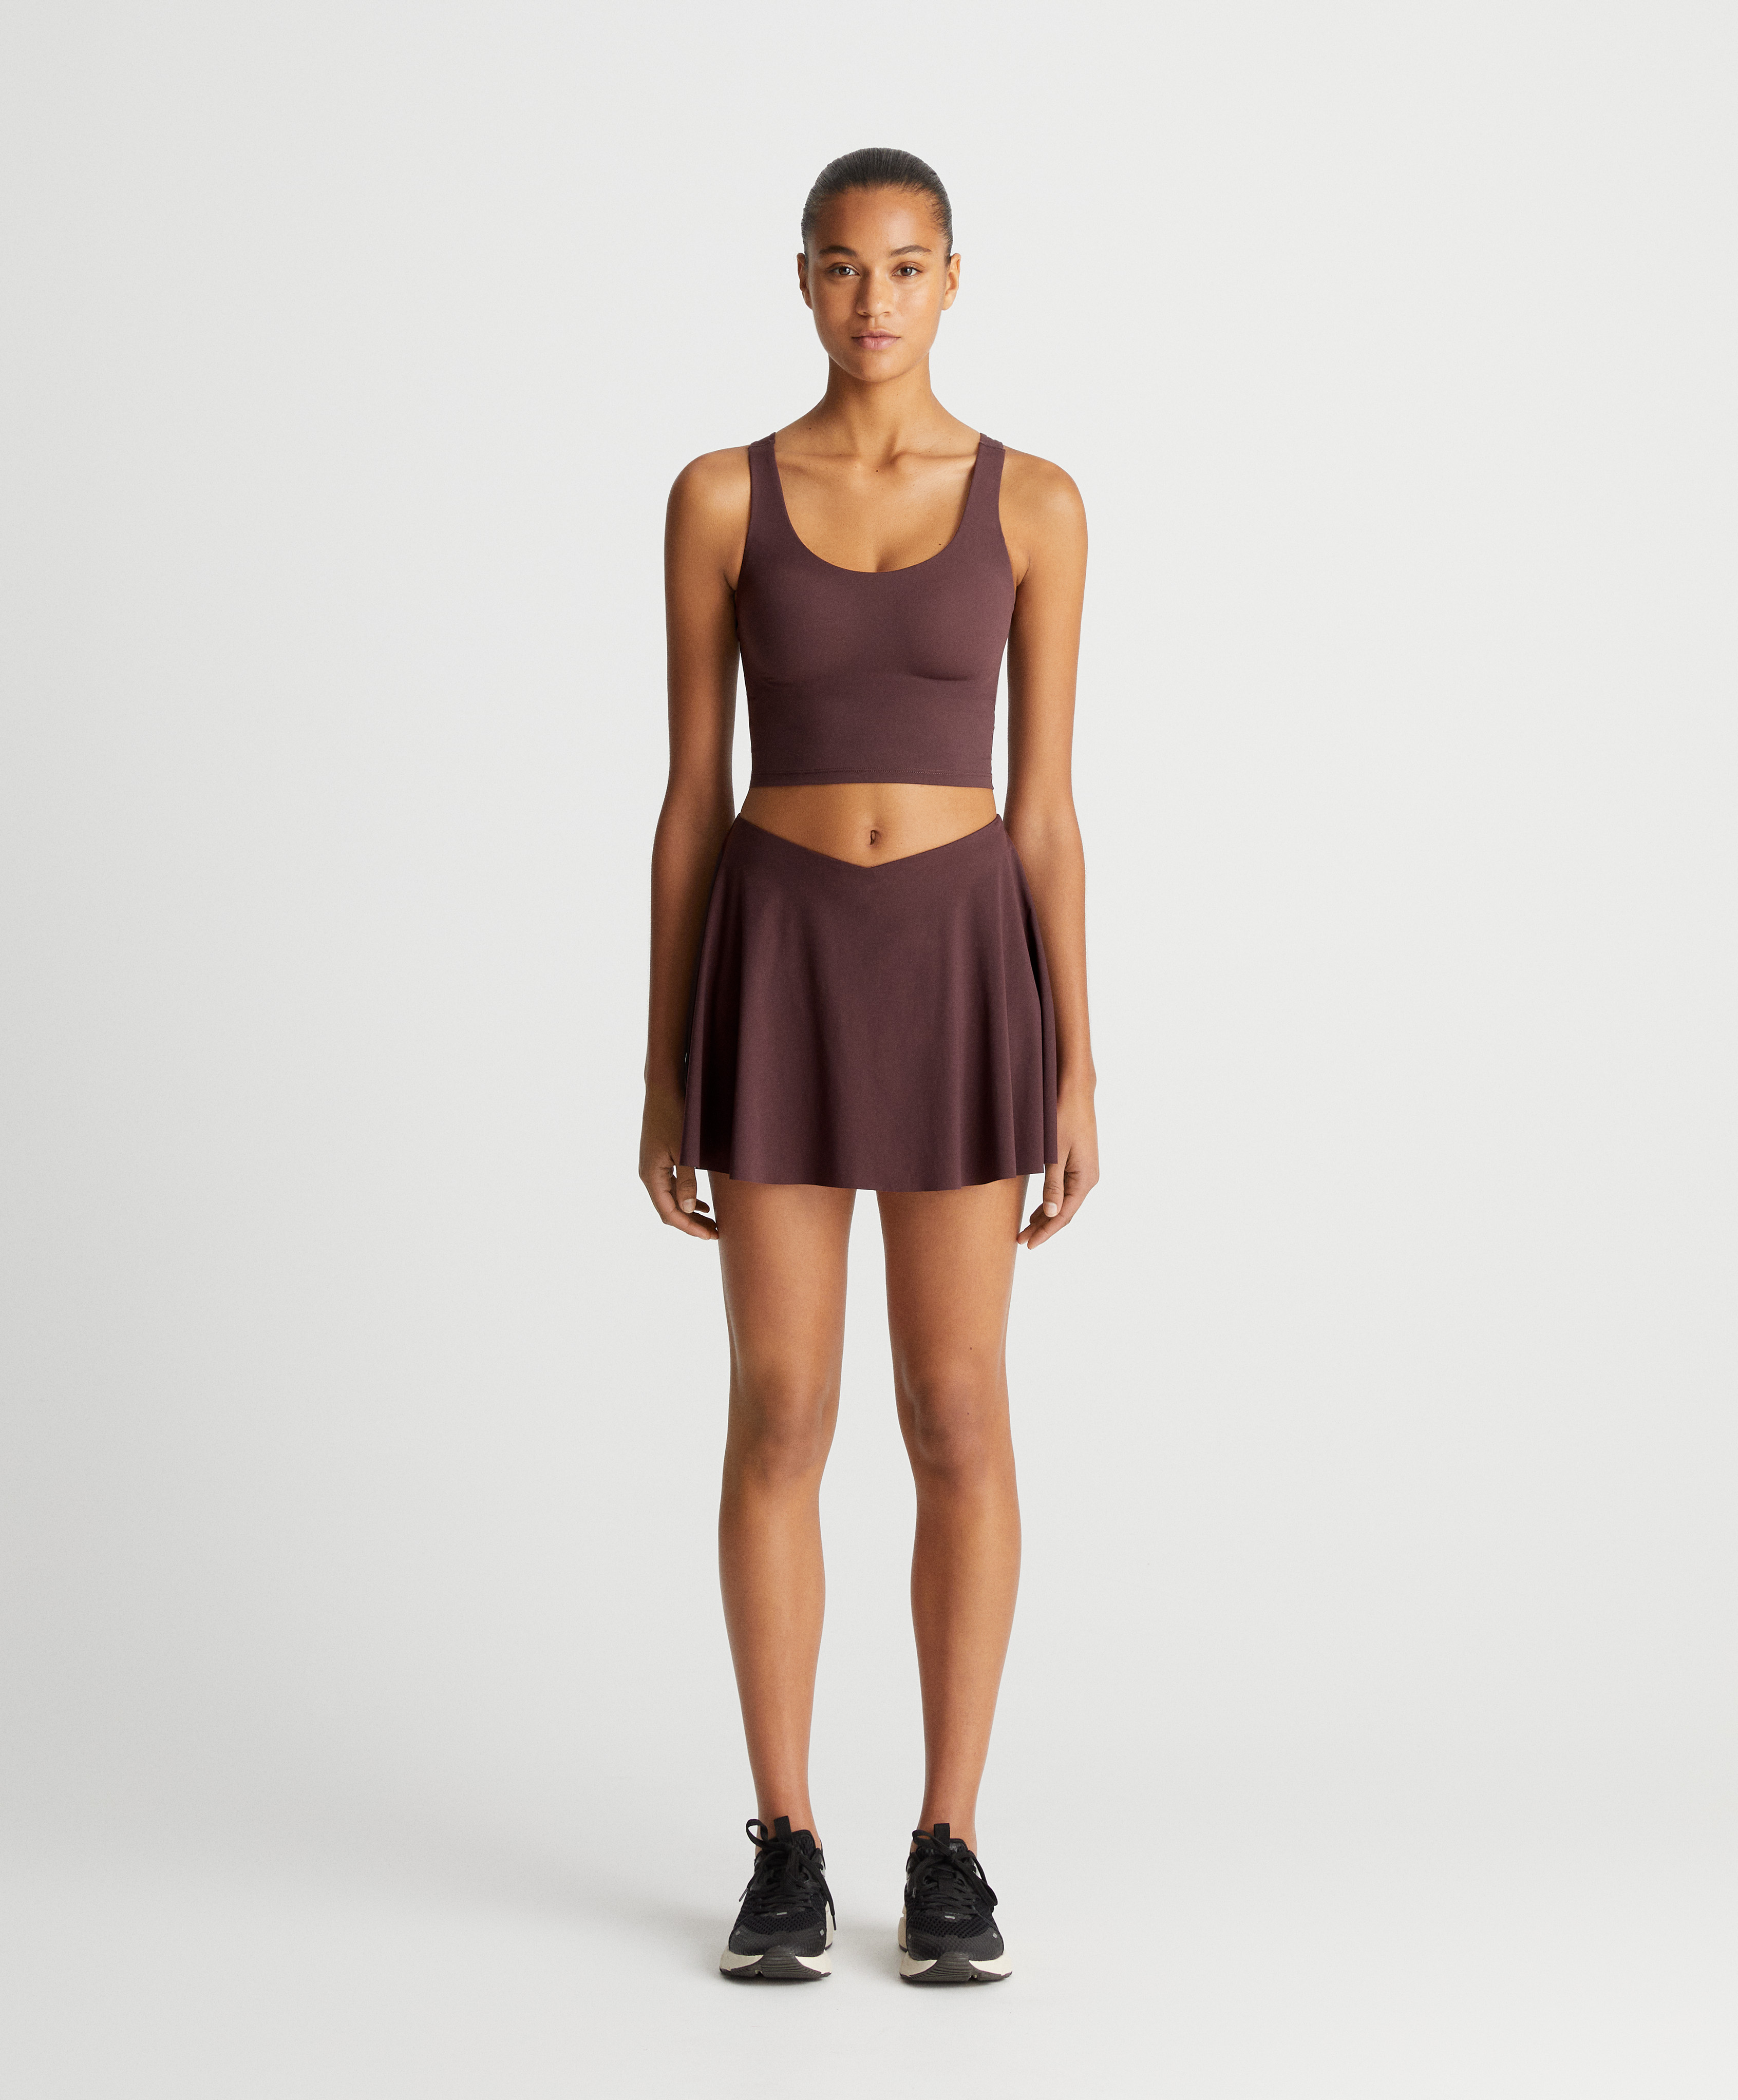 Brown light touch shorts total look